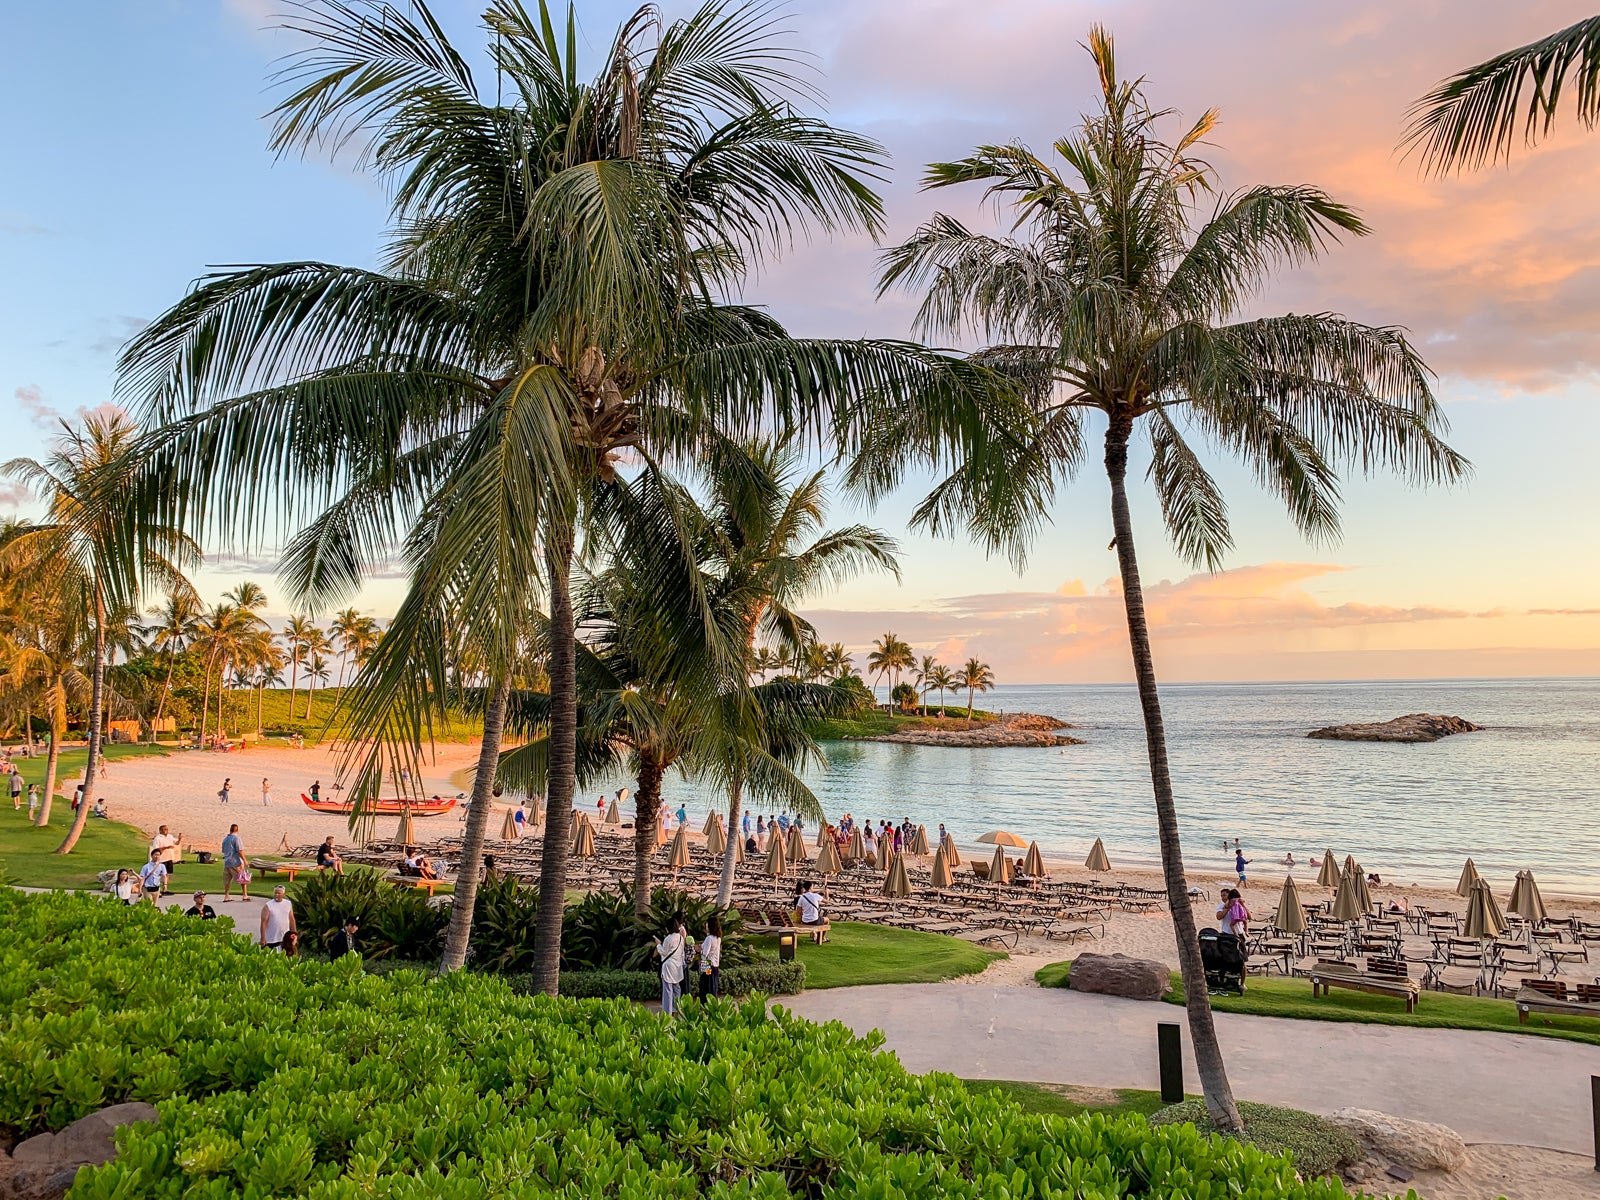 Deal alert: Flights to Hawaii from $299 available into late 2020